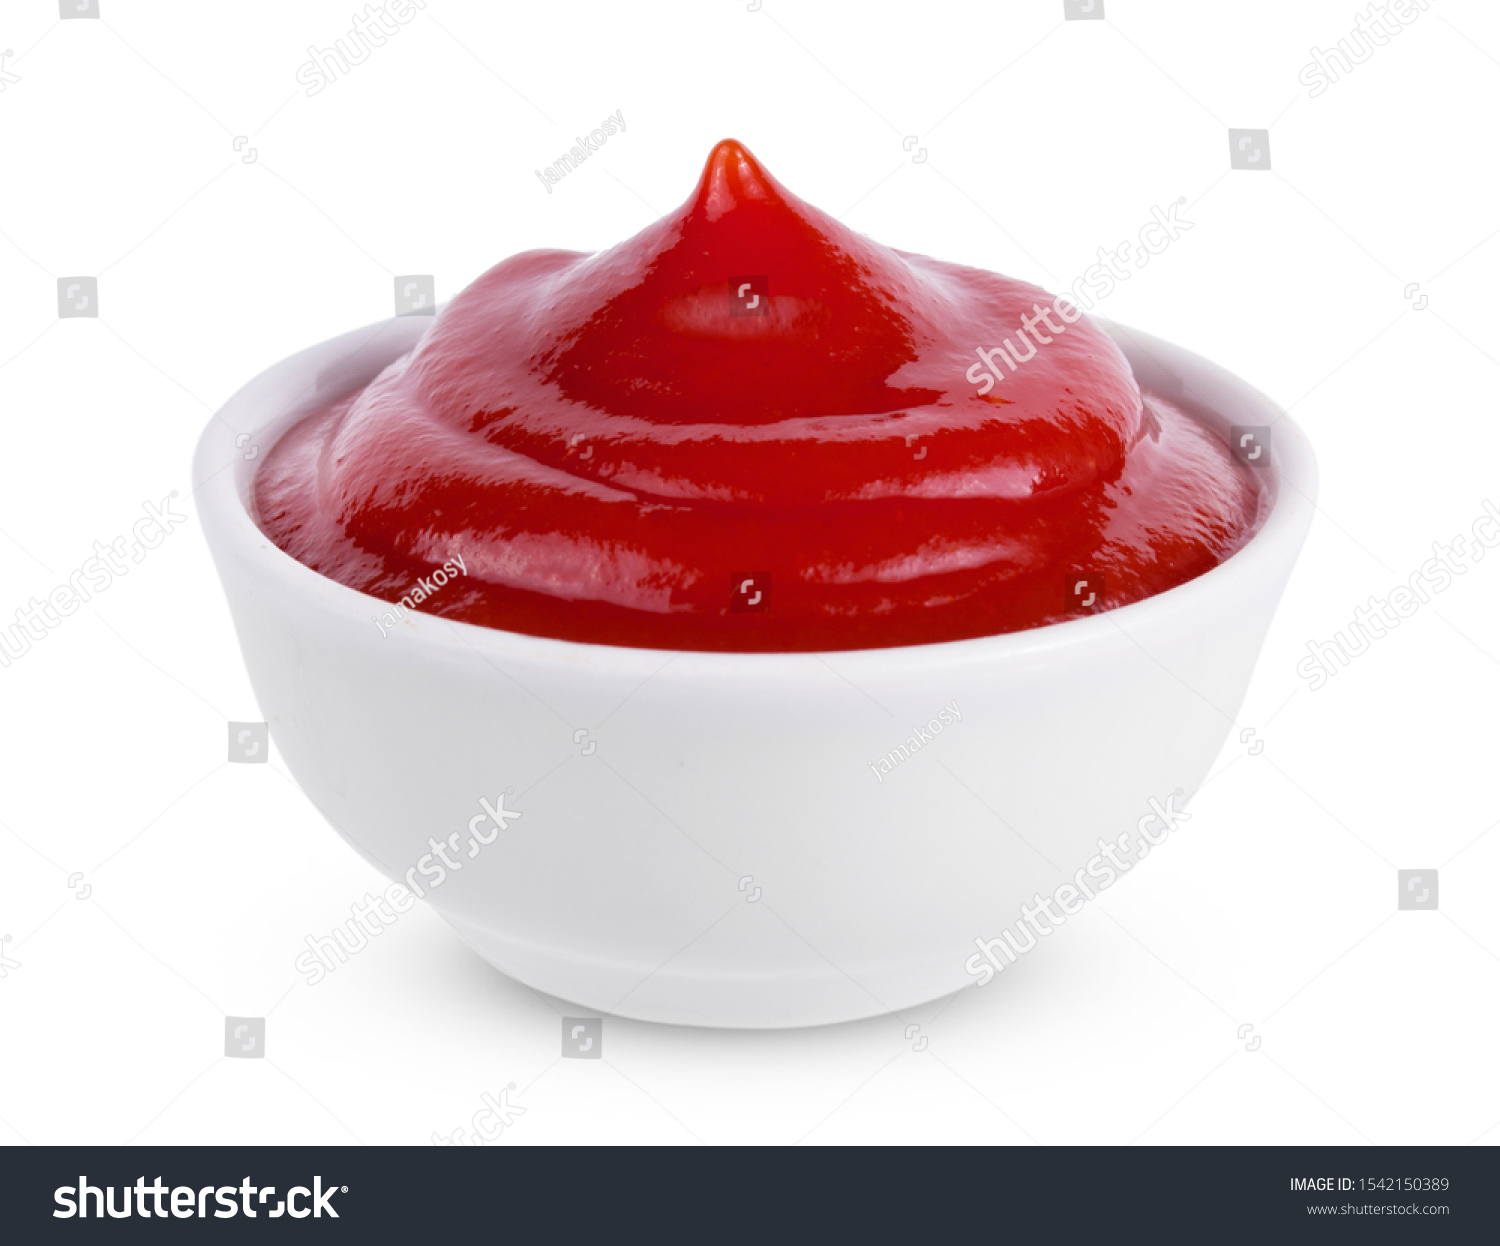 Red tasty ketchup or tomato sauce in bowl isolated on white background #1542150389